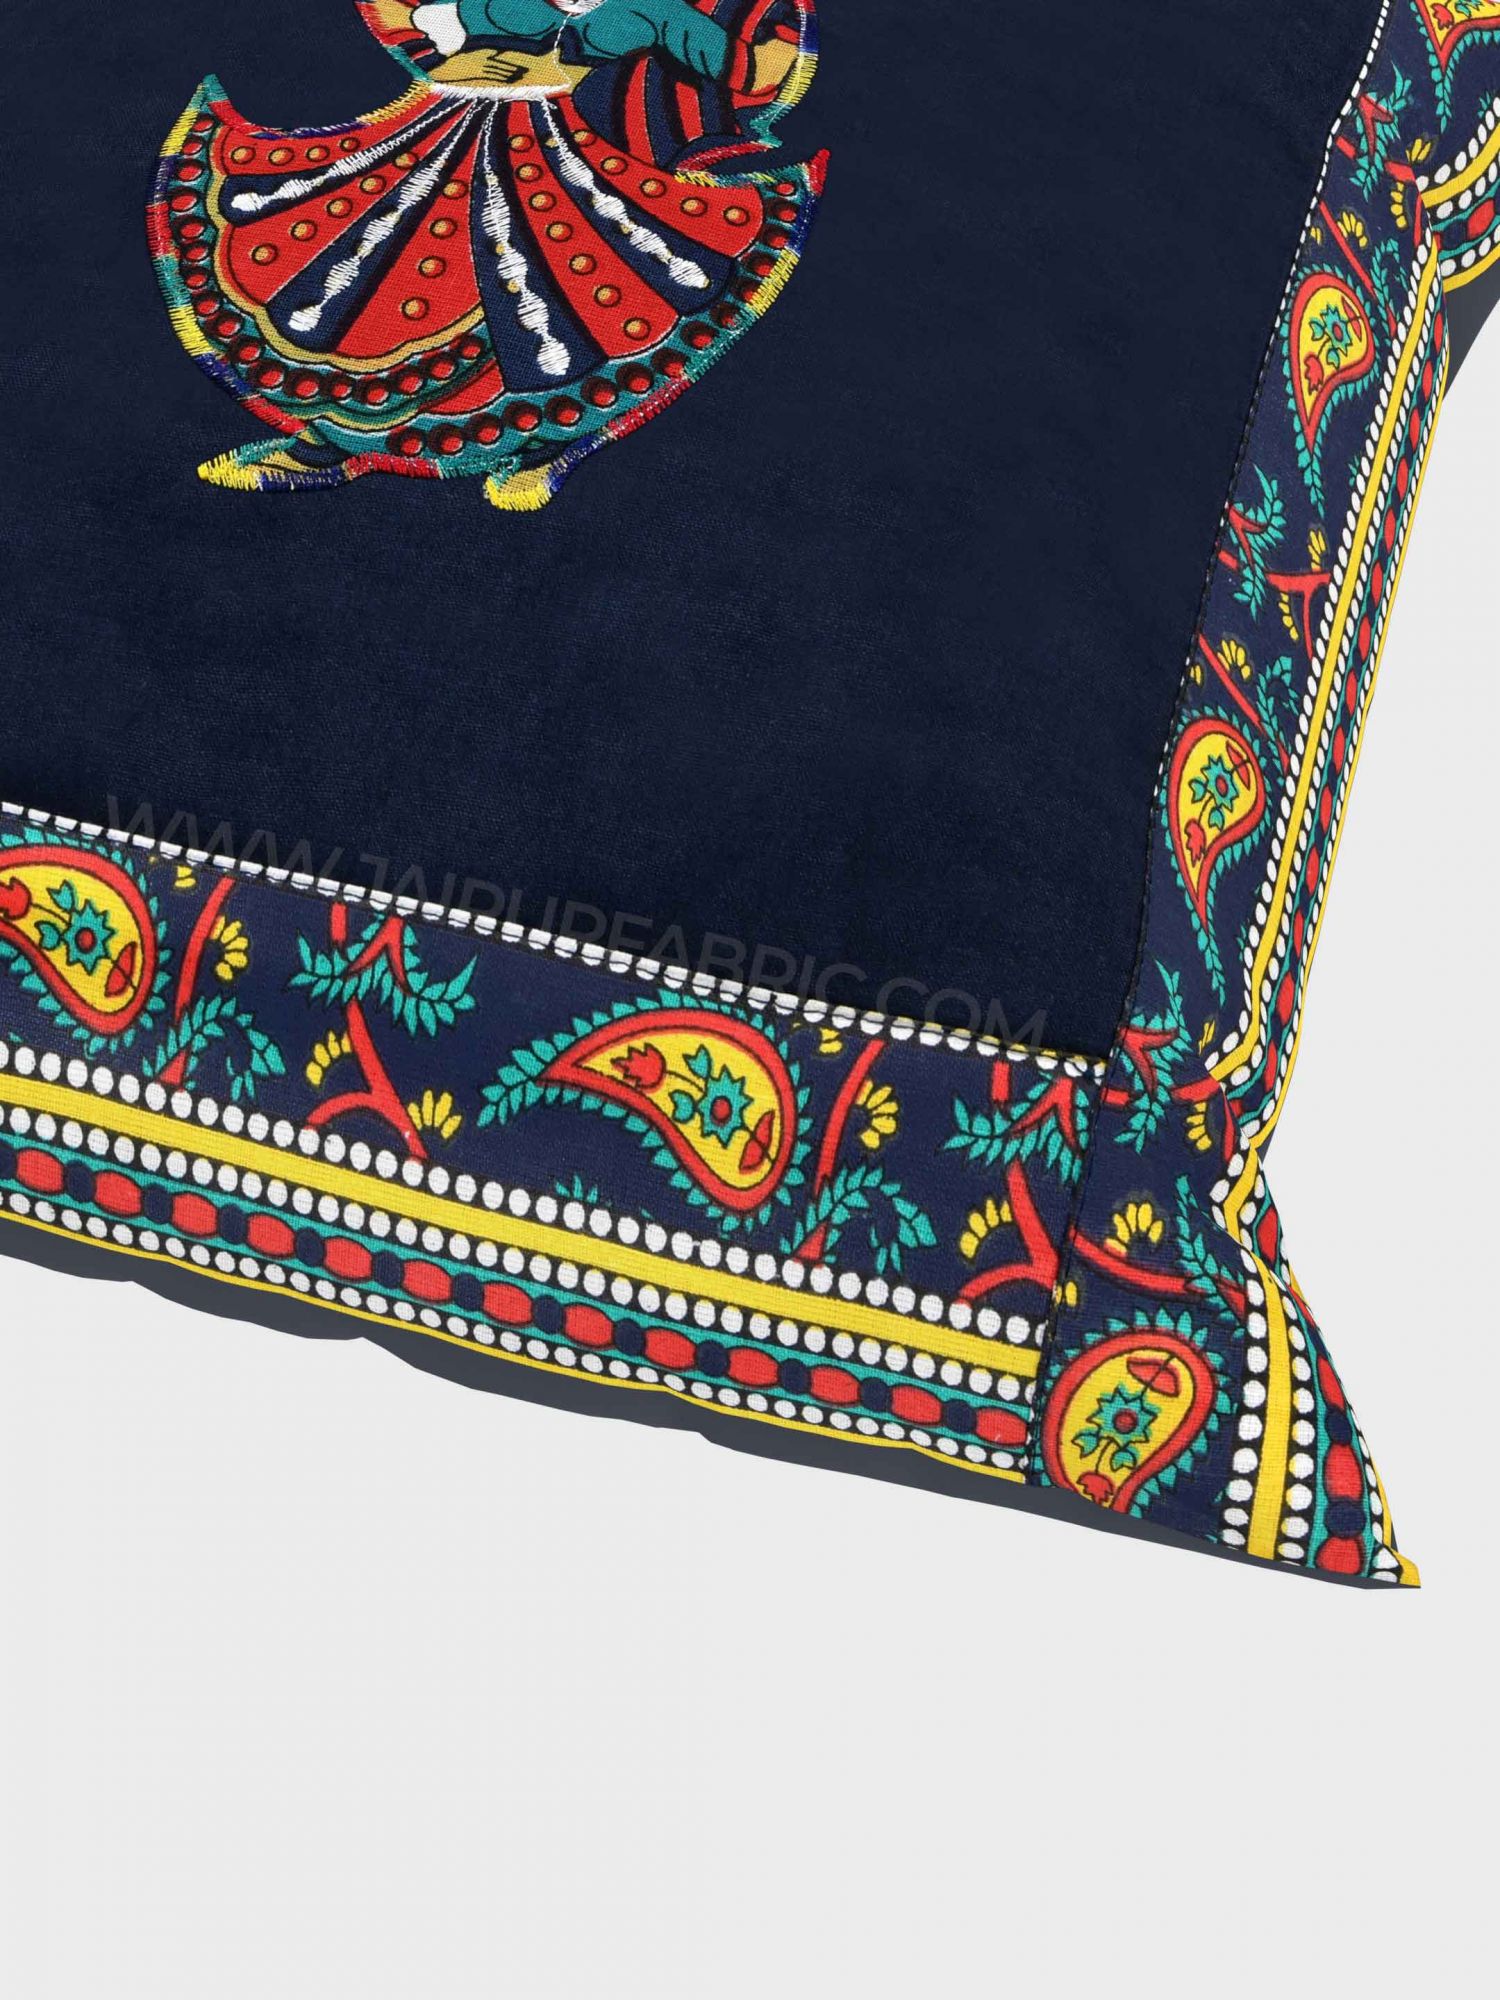 Applique Blue Rajasthani Dance Jaipuri Hand Made Embroidery Patch Work Cushion Cover